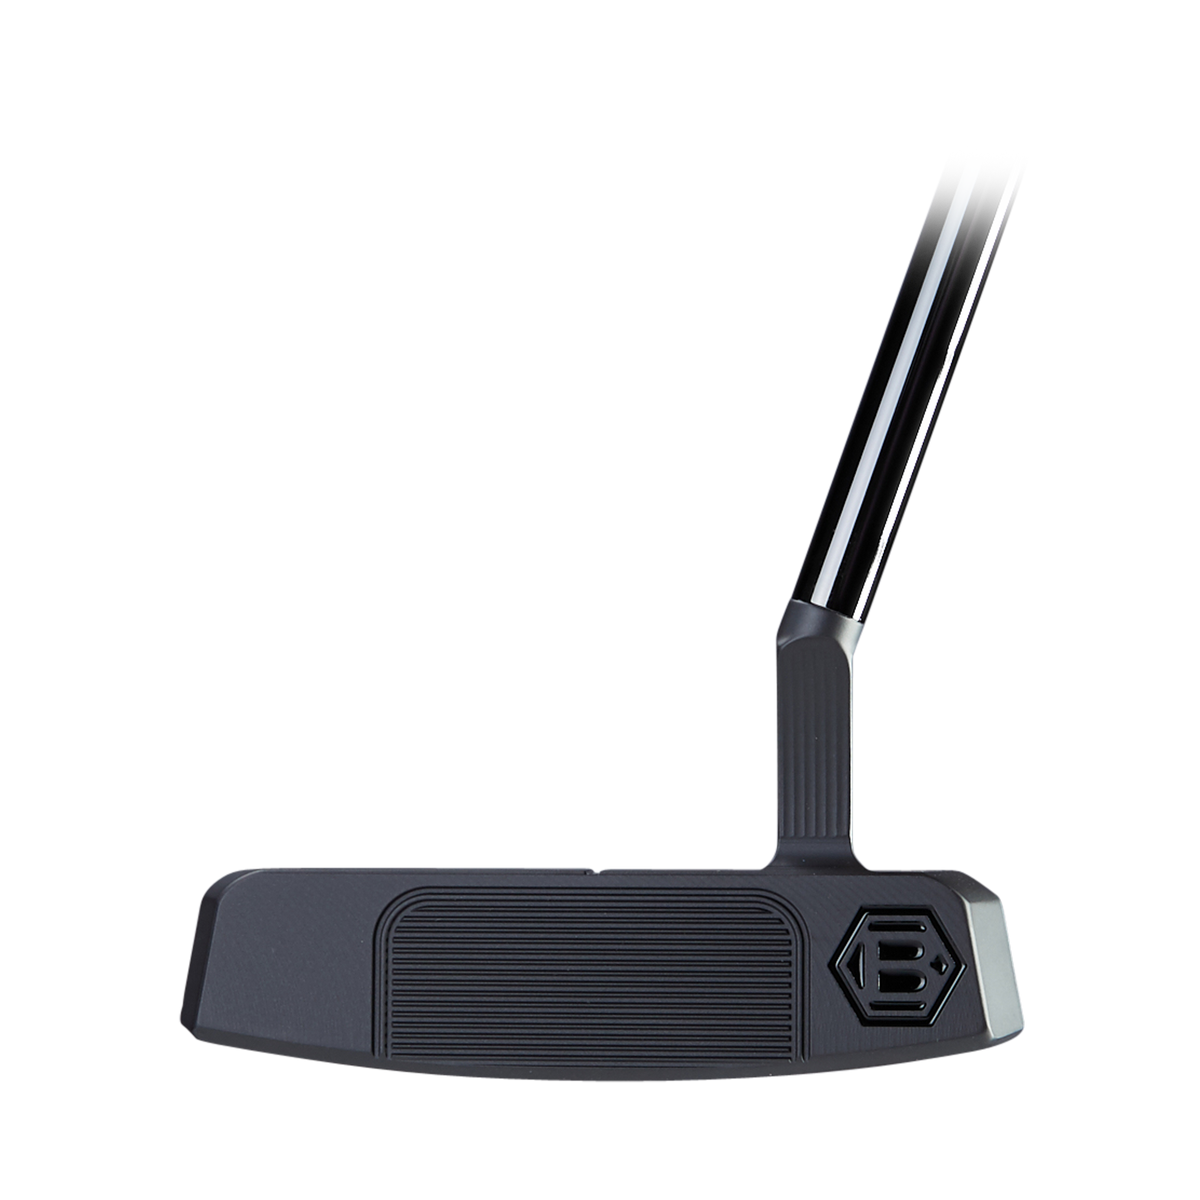 INOVAI 6.0 Limited Blackout Putter